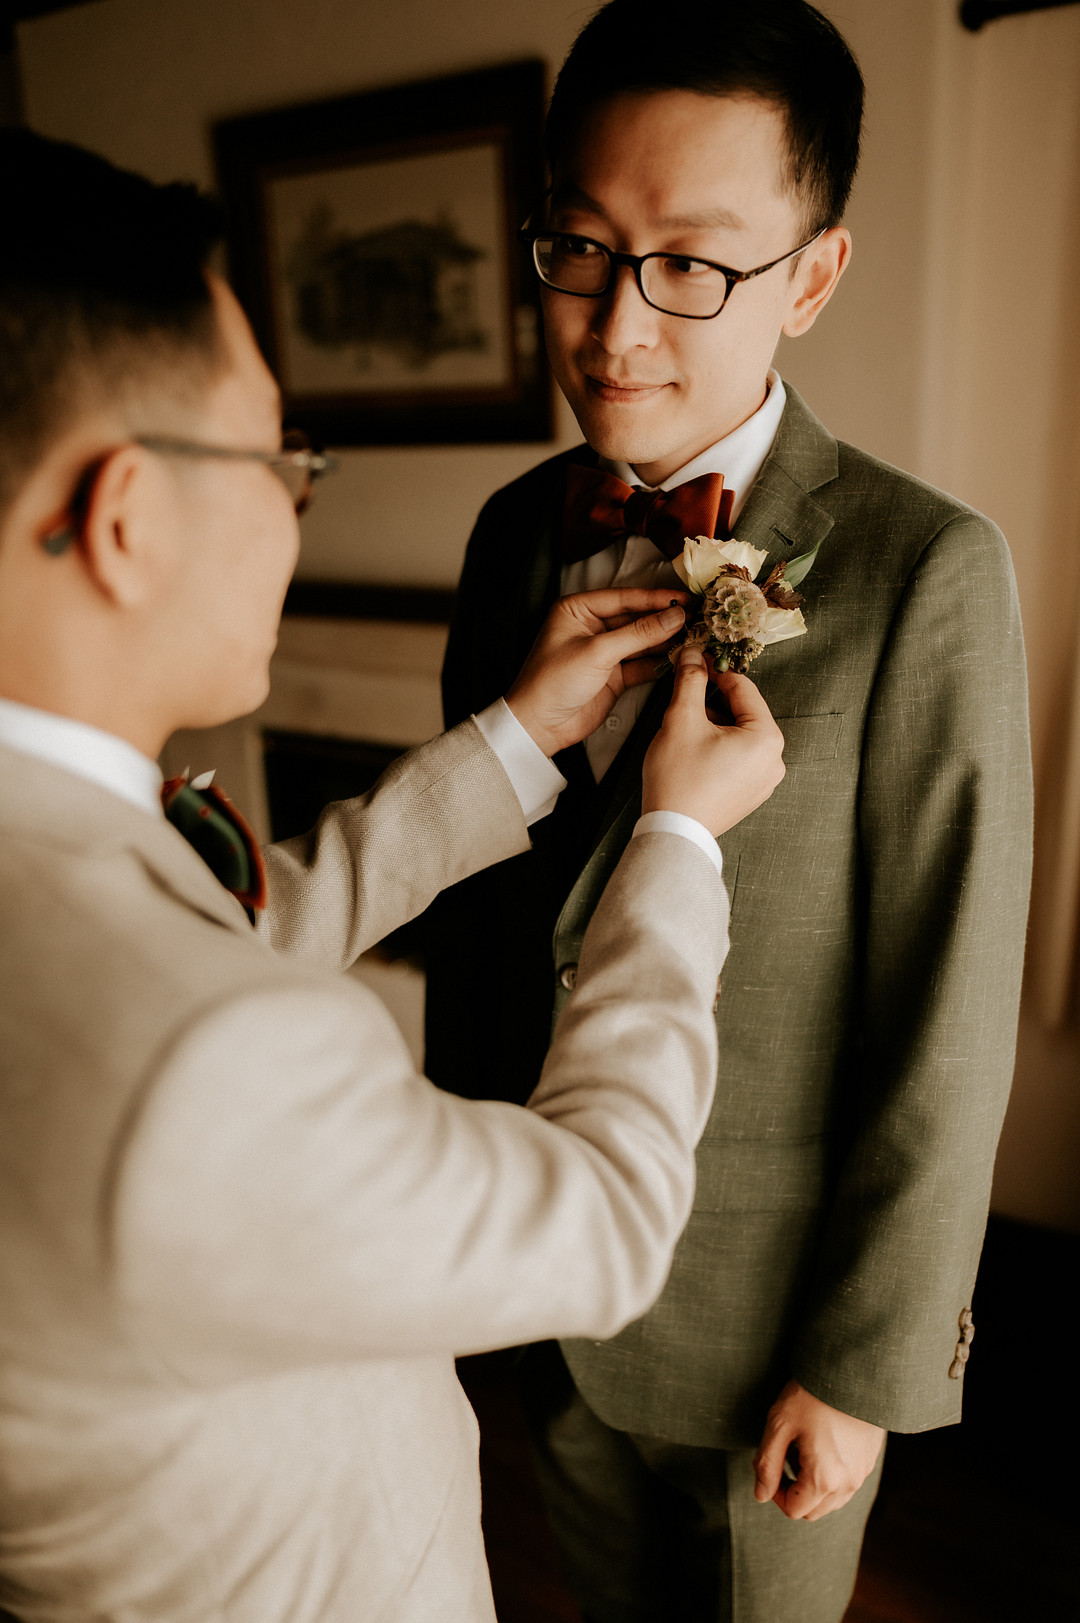 An Asian man in a tan suit pins a boutonniere on an Asian man's olive green suit. They are looking at each other with love. It's their wedding day!